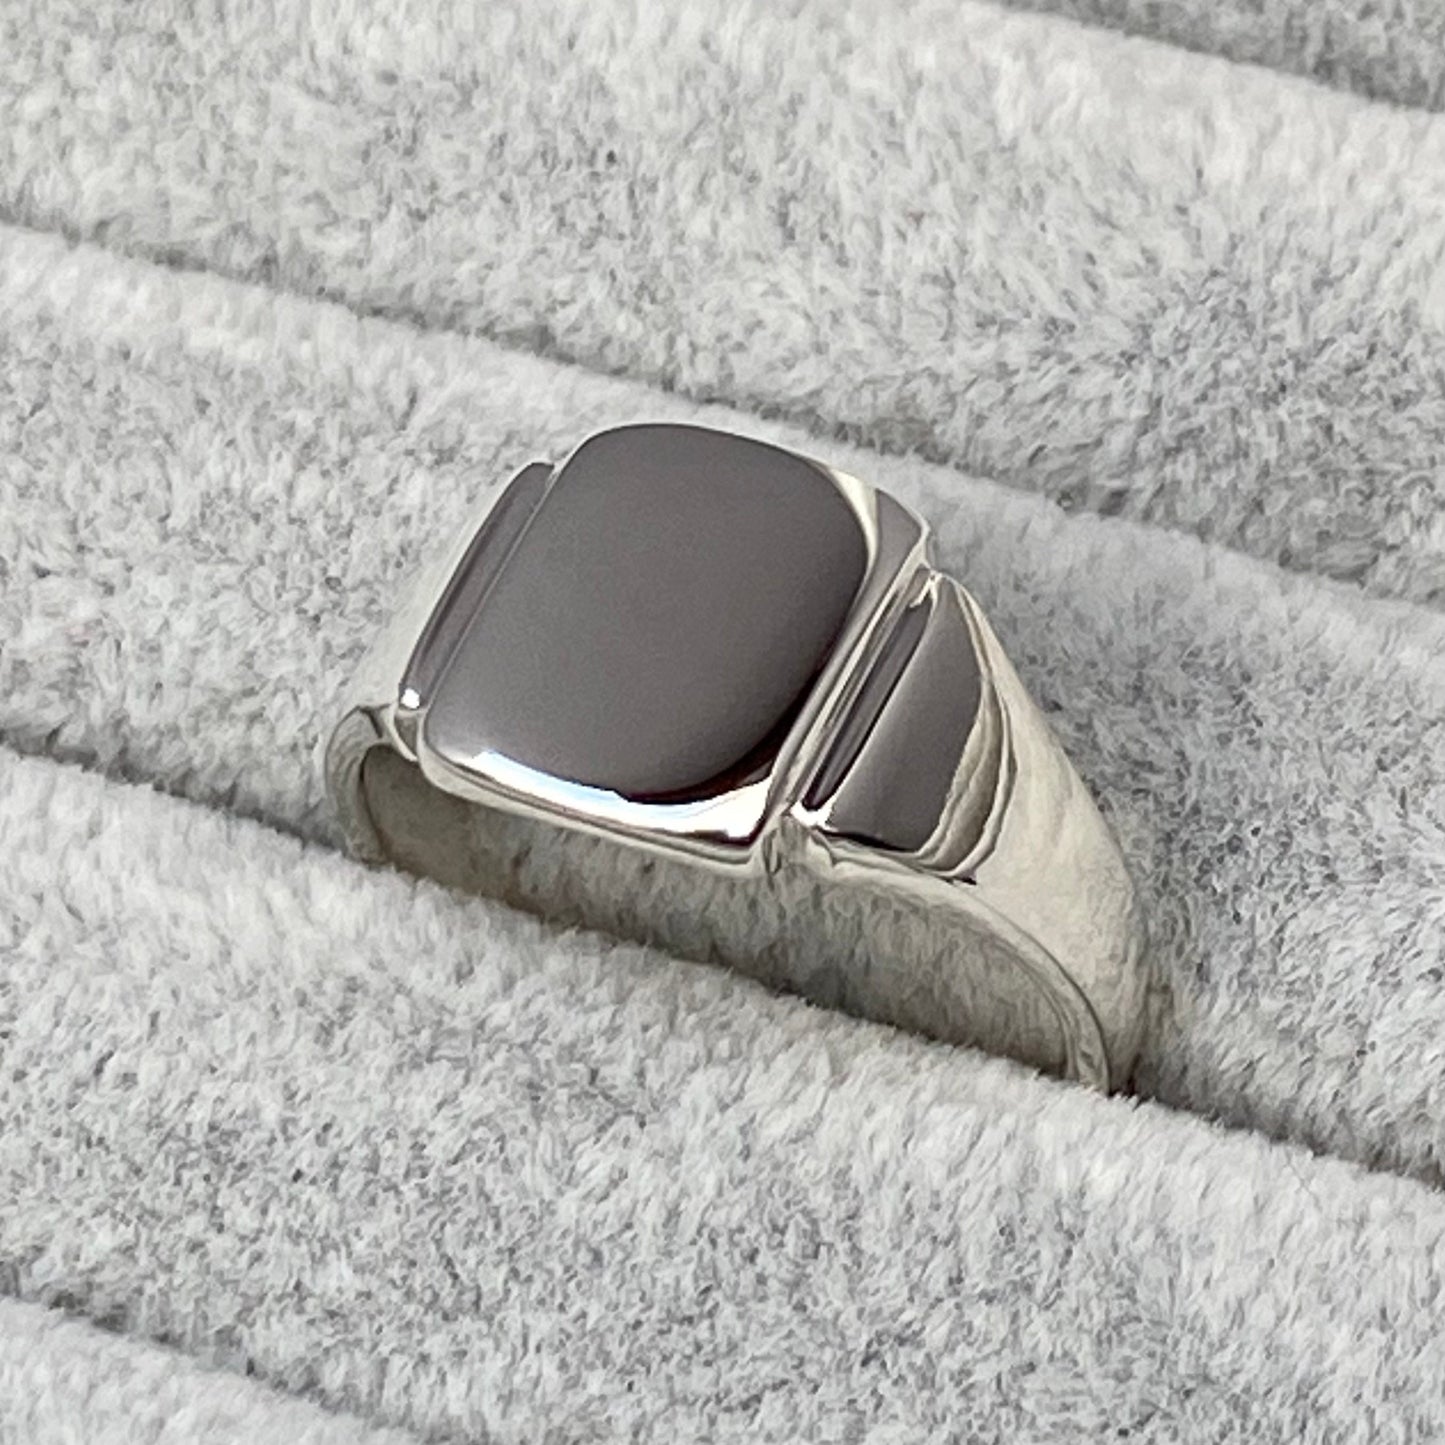 New - Vintage inspired silver polished cushion signet ring - Made to order in sizes J to X - 4 3/4 to 11 1/2 - Can be hand engraved